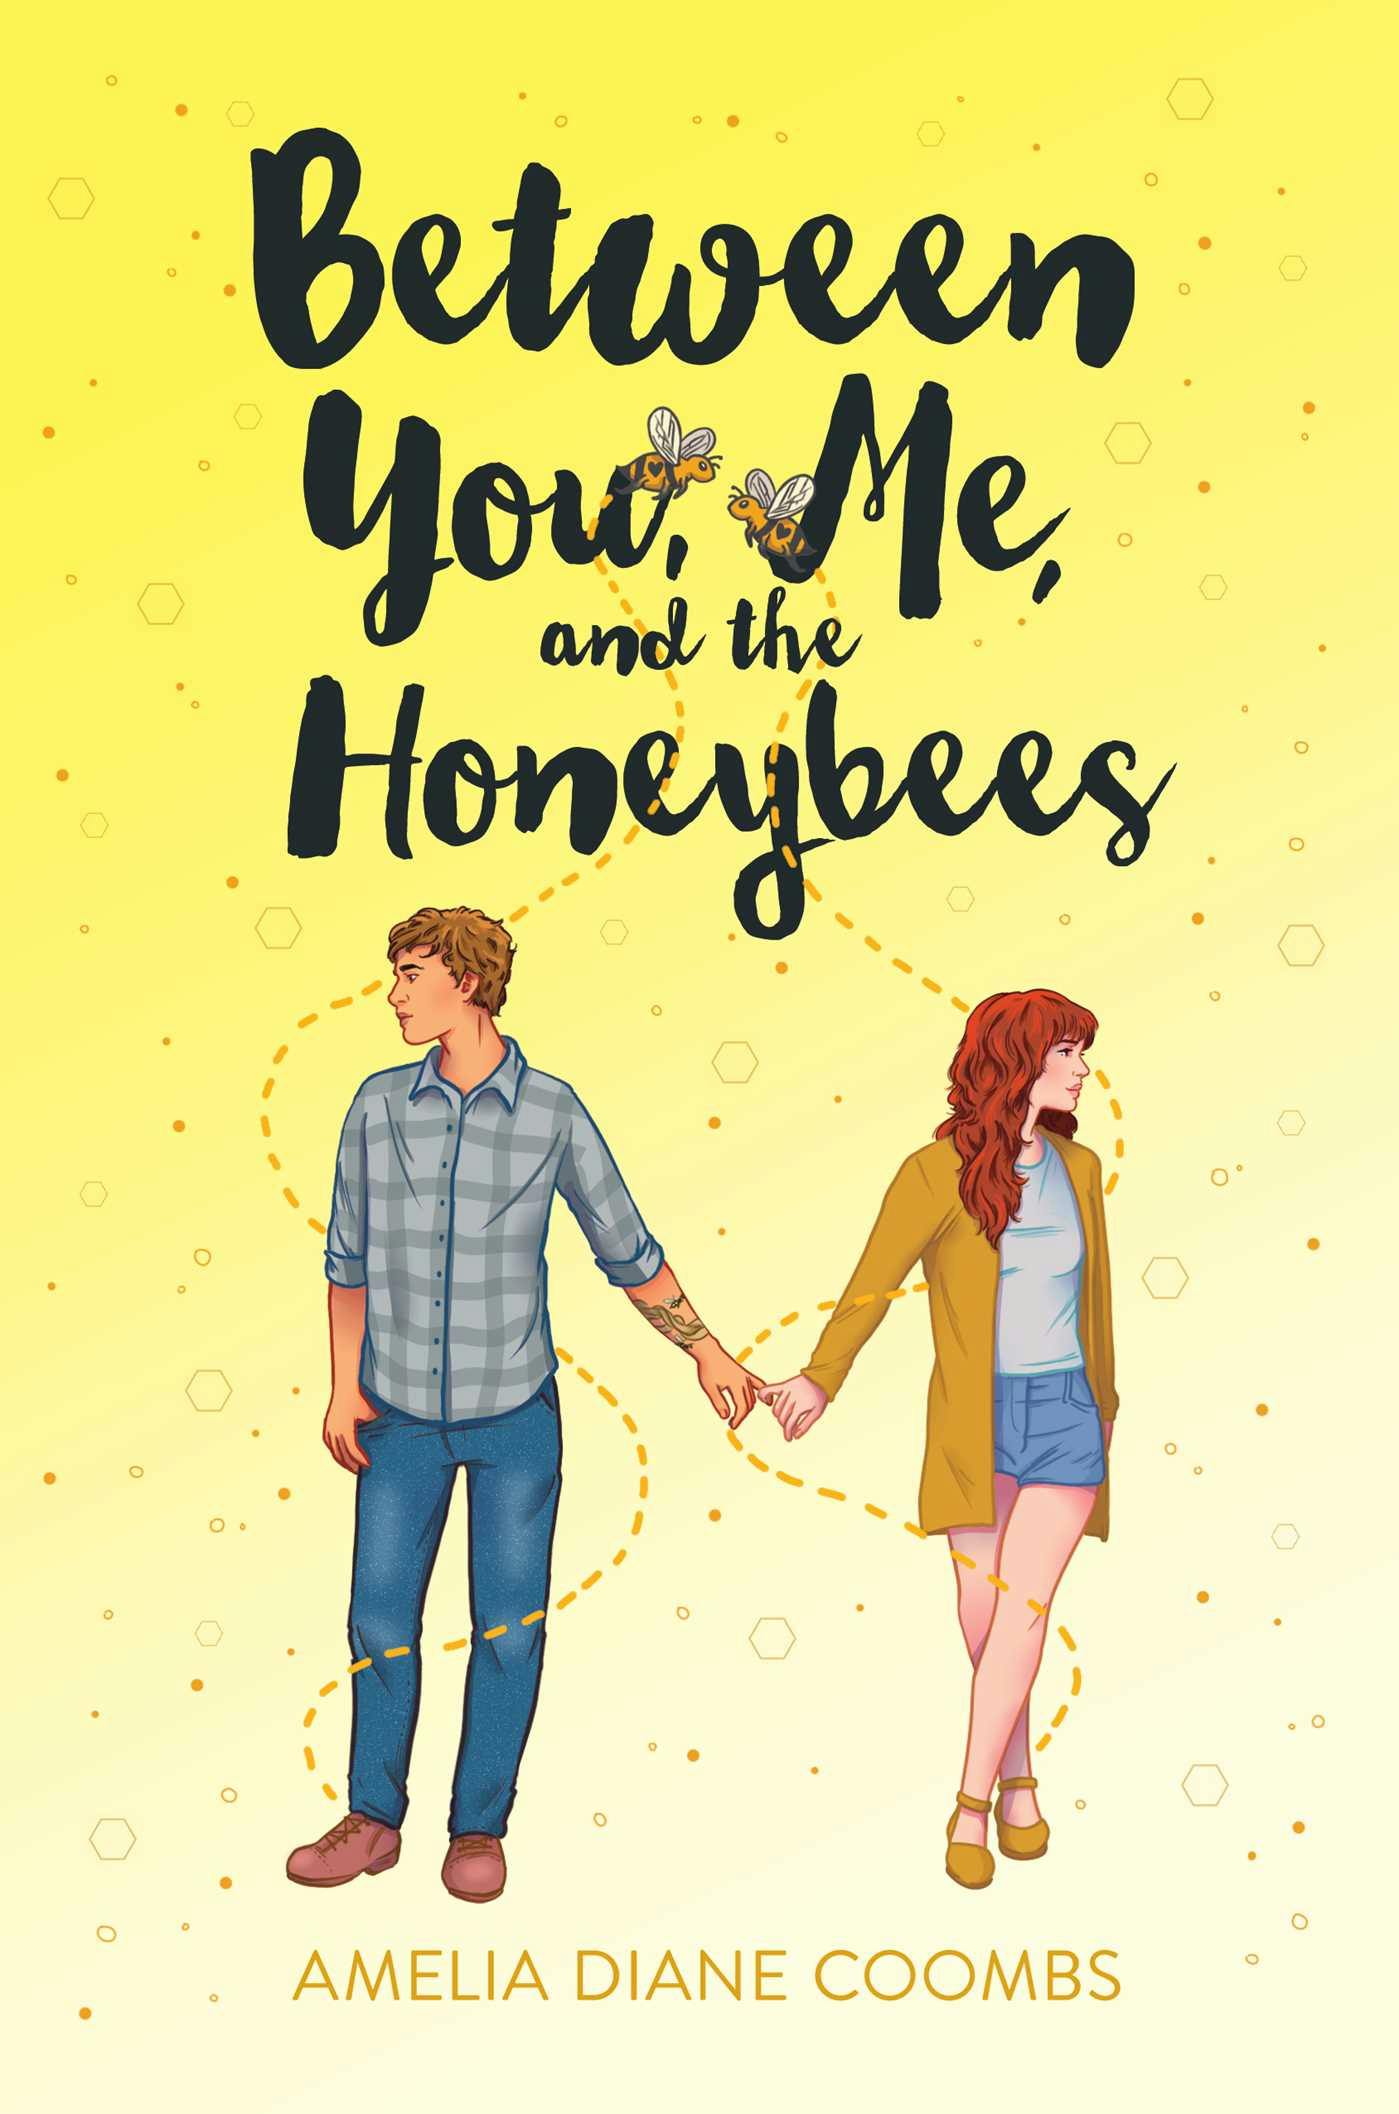 Between You, Me, and the Honeybees - Amelia Diane Coombs